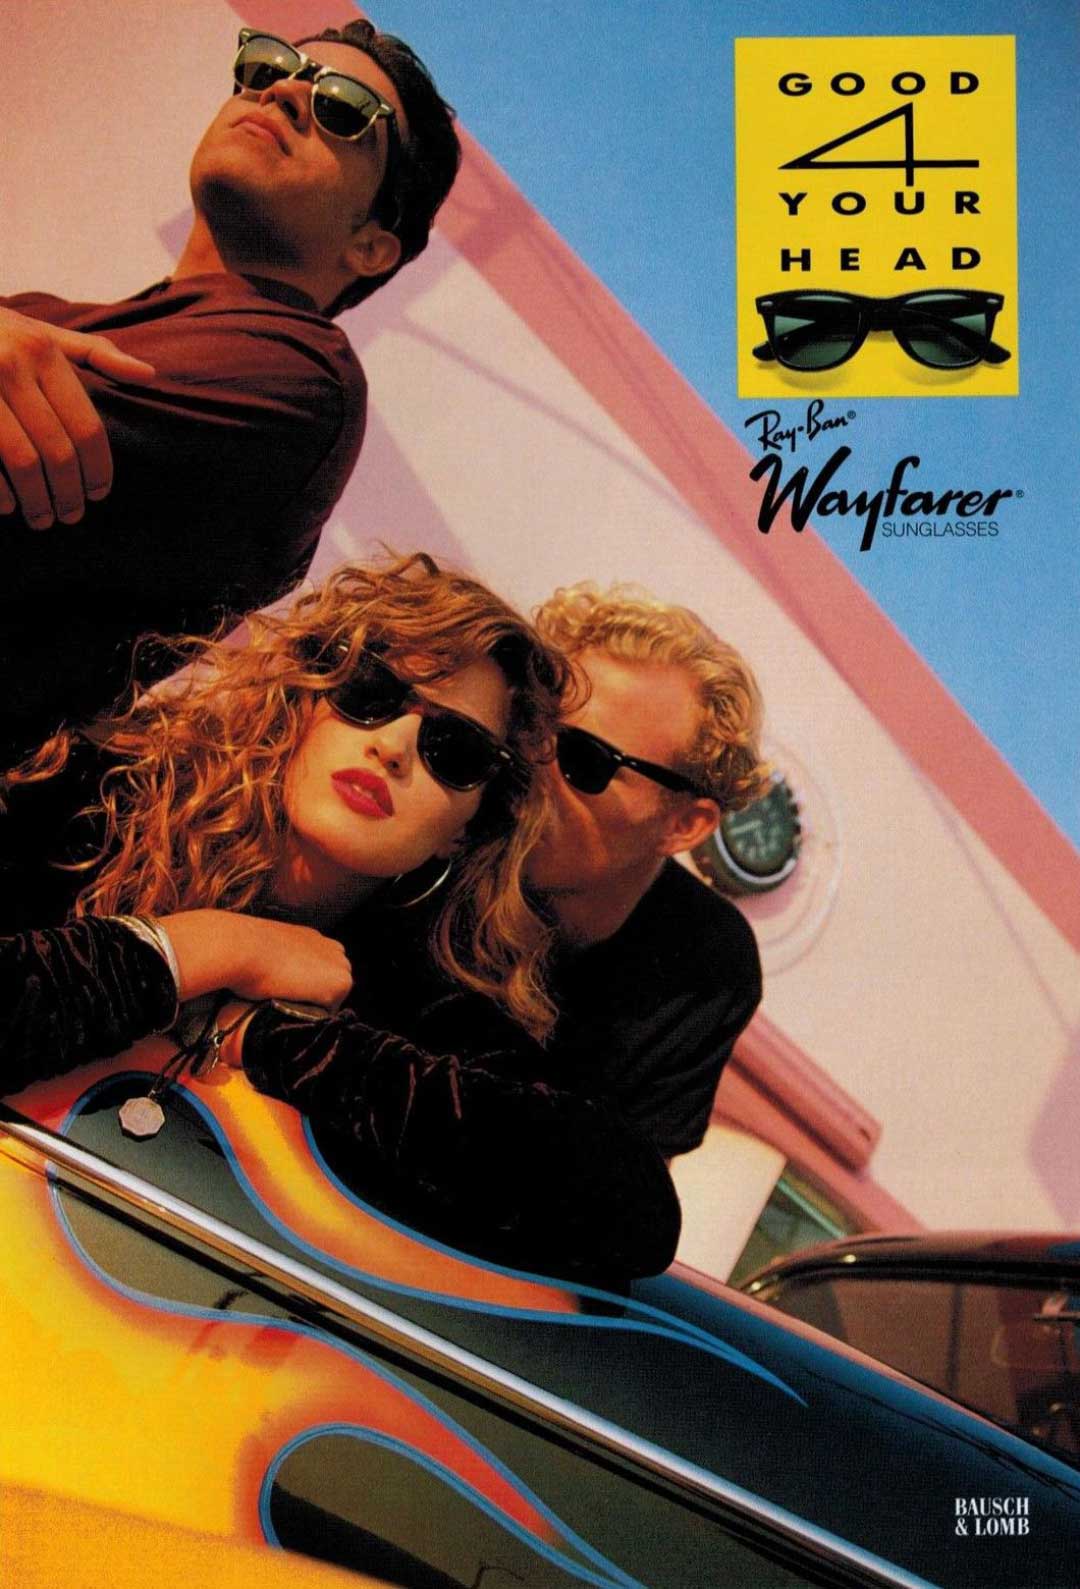 Bausch and Lomb poster advert for the Ray Ban Wayfarer sunglasses frame range